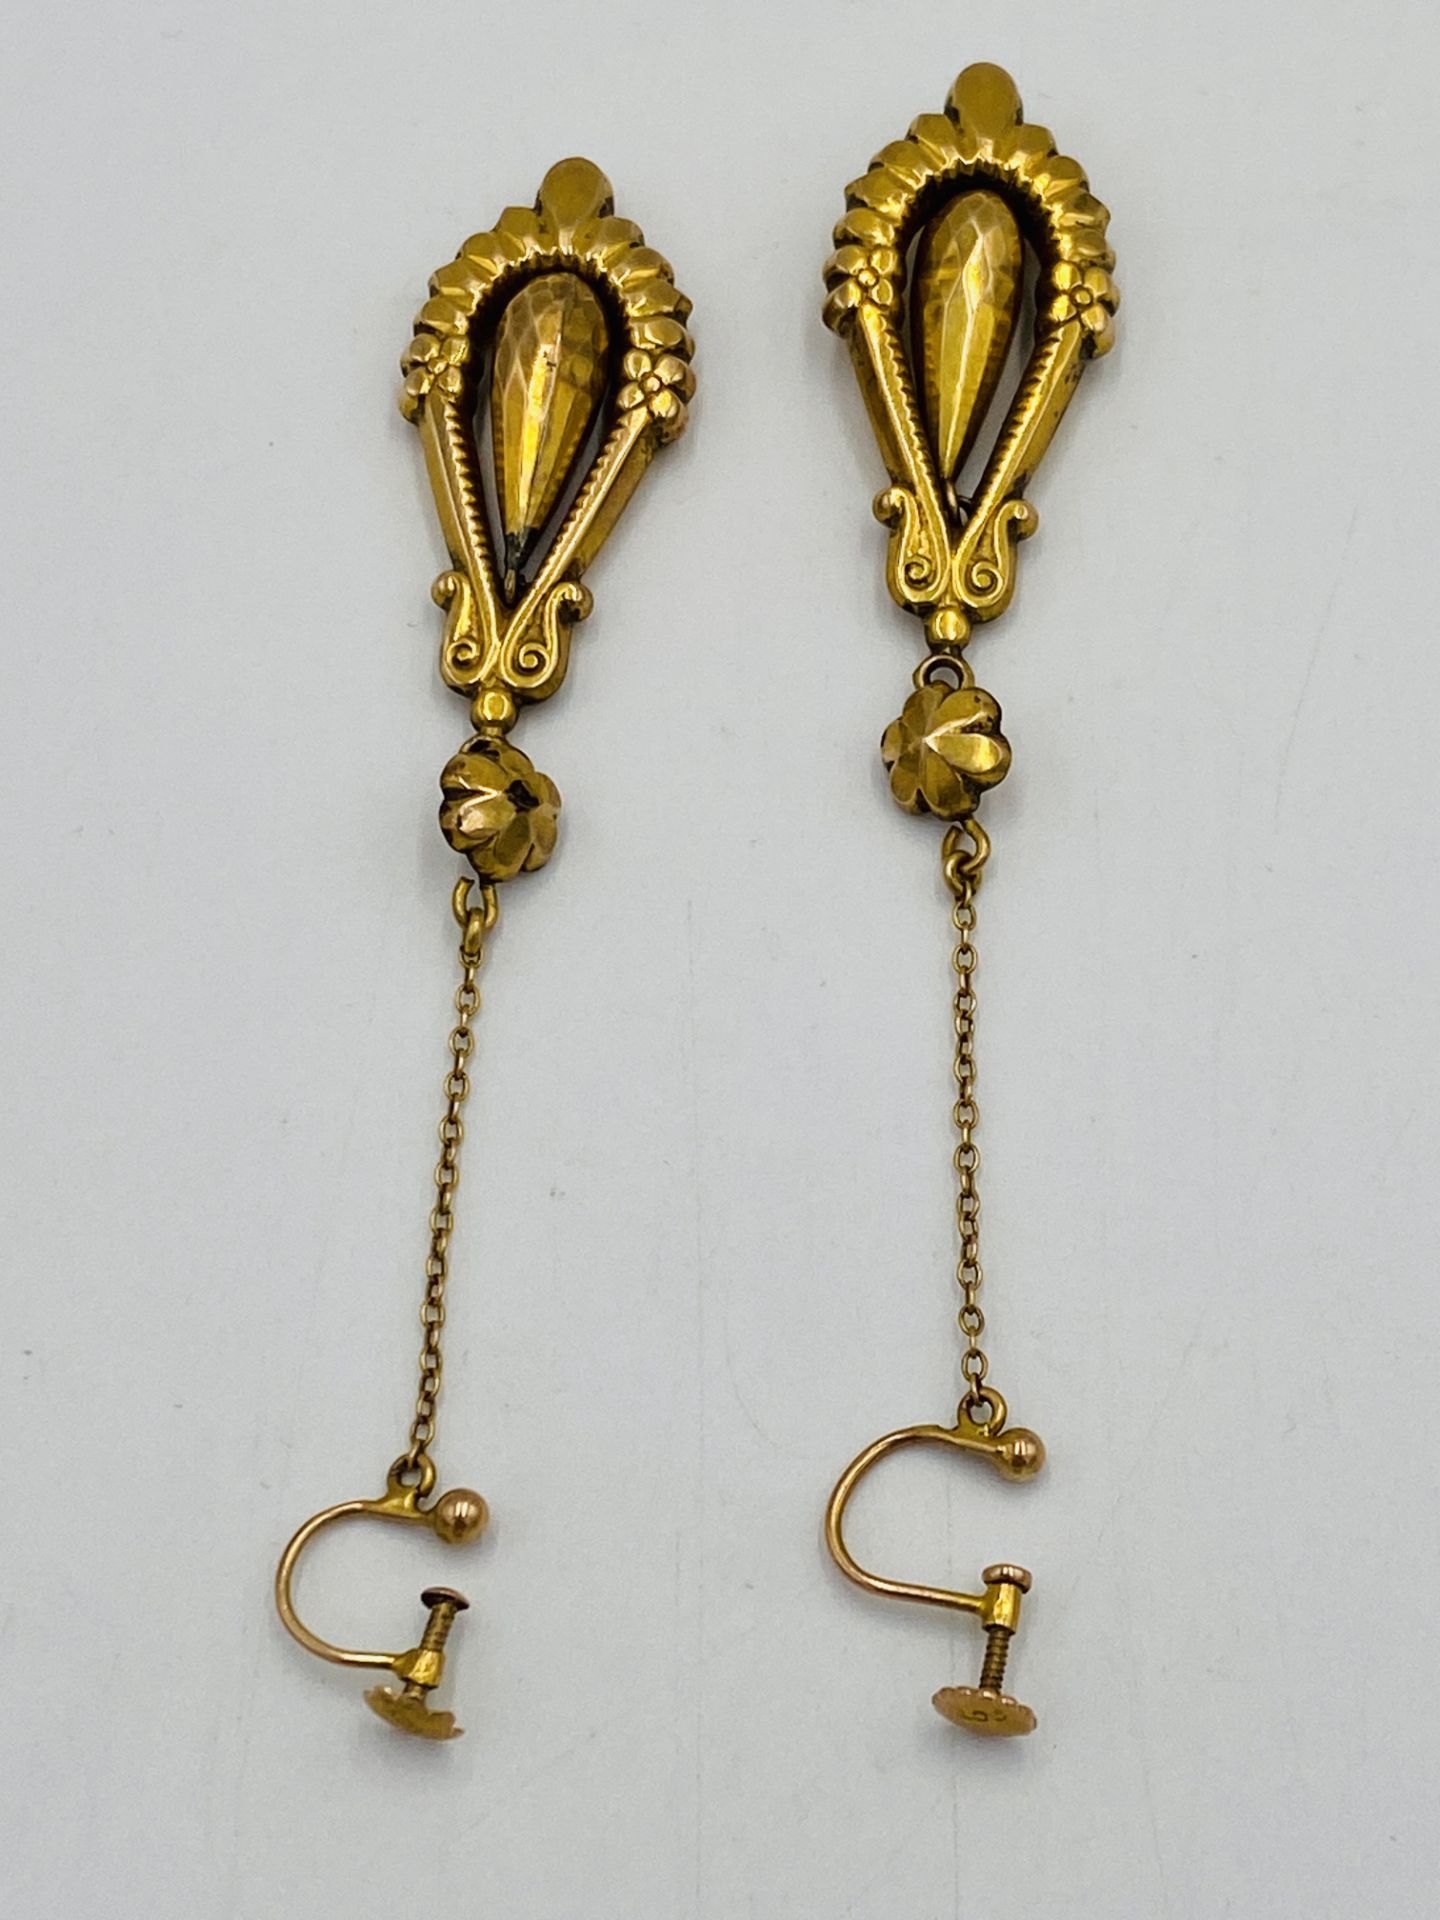 9ct gold drop earrings - Image 4 of 5